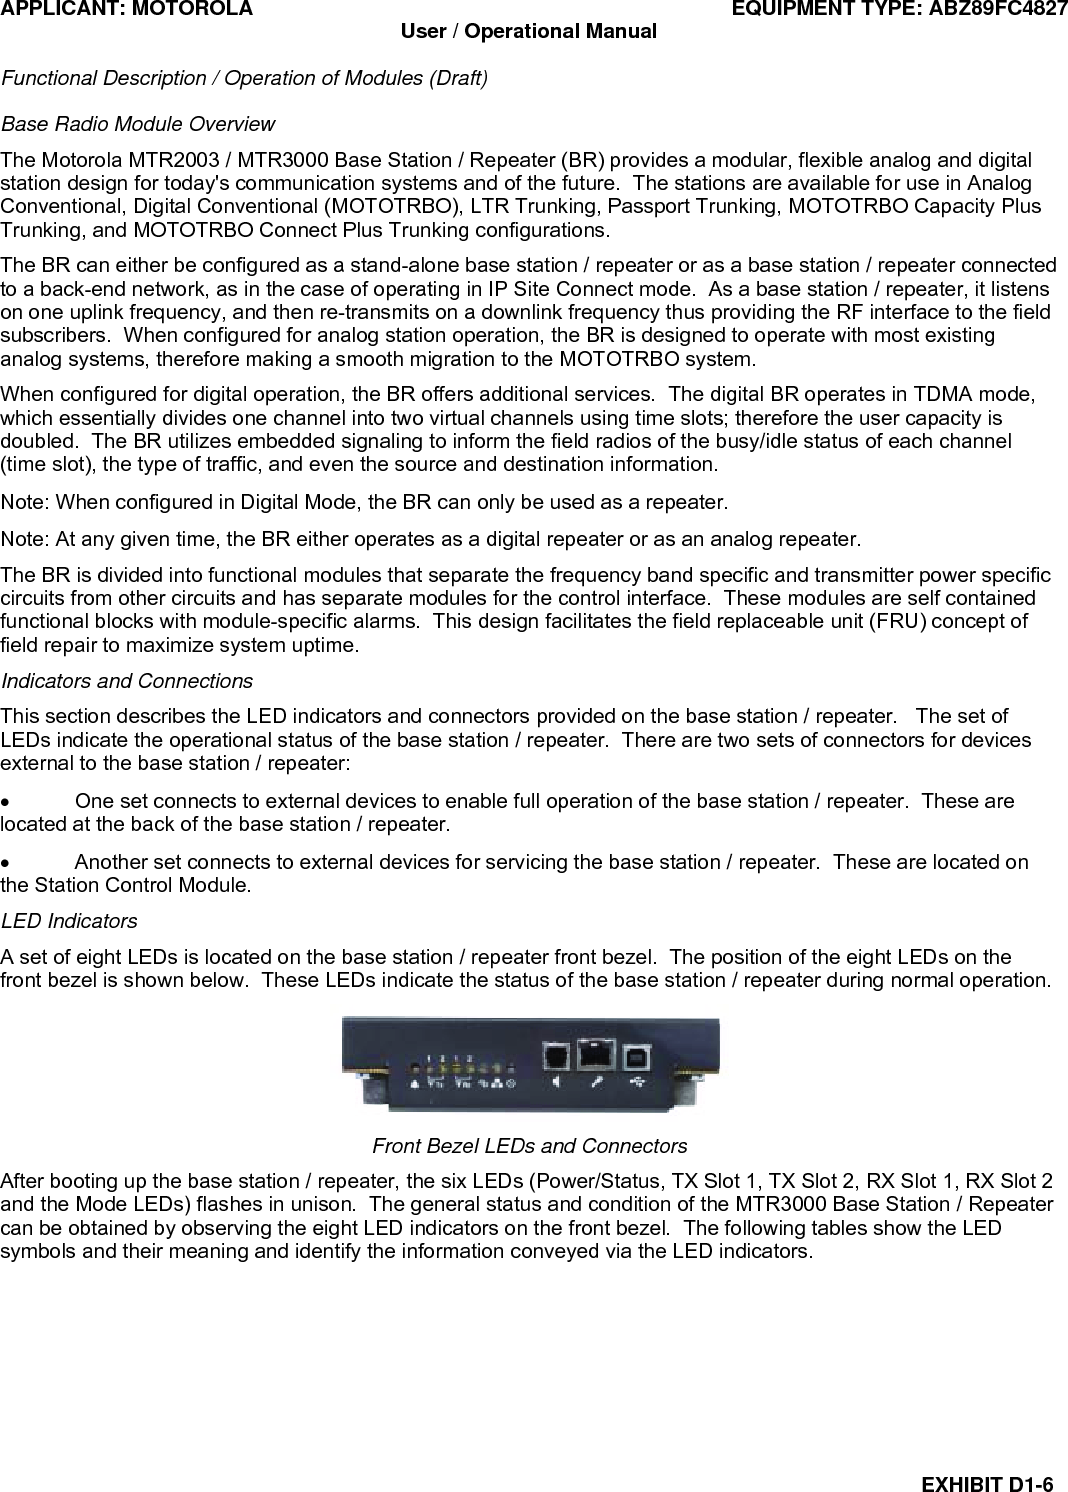 APPLICANT: MOTOROLA  EQUIPMENT TYPE: ABZ89FC4827 User / Operational Manual  Functional Description / Operation of Modules (Draft)  EXHIBIT D1-6 Base Radio Module Overview The Motorola MTR2003 / MTR3000 Base Station / Repeater (BR) provides a modular, flexible analog and digital station design for today&apos;s communication systems and of the future.  The stations are available for use in Analog Conventional, Digital Conventional (MOTOTRBO), LTR Trunking, Passport Trunking, MOTOTRBO Capacity Plus Trunking, and MOTOTRBO Connect Plus Trunking configurations. The BR can either be configured as a stand-alone base station / repeater or as a base station / repeater connected to a back-end network, as in the case of operating in IP Site Connect mode.  As a base station / repeater, it listens on one uplink frequency, and then re-transmits on a downlink frequency thus providing the RF interface to the field subscribers.  When configured for analog station operation, the BR is designed to operate with most existing analog systems, therefore making a smooth migration to the MOTOTRBO system. When configured for digital operation, the BR offers additional services.  The digital BR operates in TDMA mode, which essentially divides one channel into two virtual channels using time slots; therefore the user capacity is doubled.  The BR utilizes embedded signaling to inform the field radios of the busy/idle status of each channel (time slot), the type of traffic, and even the source and destination information. Note: When configured in Digital Mode, the BR can only be used as a repeater. Note: At any given time, the BR either operates as a digital repeater or as an analog repeater. The BR is divided into functional modules that separate the frequency band specific and transmitter power specific circuits from other circuits and has separate modules for the control interface.  These modules are self contained functional blocks with module-specific alarms.  This design facilitates the field replaceable unit (FRU) concept of field repair to maximize system uptime. Indicators and Connections This section describes the LED indicators and connectors provided on the base station / repeater.   The set of LEDs indicate the operational status of the base station / repeater.  There are two sets of connectors for devices external to the base station / repeater: •  One set connects to external devices to enable full operation of the base station / repeater.  These are located at the back of the base station / repeater. •  Another set connects to external devices for servicing the base station / repeater.  These are located on the Station Control Module. LED Indicators A set of eight LEDs is located on the base station / repeater front bezel.  The position of the eight LEDs on the front bezel is shown below.  These LEDs indicate the status of the base station / repeater during normal operation.  Front Bezel LEDs and Connectors After booting up the base station / repeater, the six LEDs (Power/Status, TX Slot 1, TX Slot 2, RX Slot 1, RX Slot 2 and the Mode LEDs) flashes in unison.  The general status and condition of the MTR3000 Base Station / Repeater can be obtained by observing the eight LED indicators on the front bezel.  The following tables show the LED symbols and their meaning and identify the information conveyed via the LED indicators. 